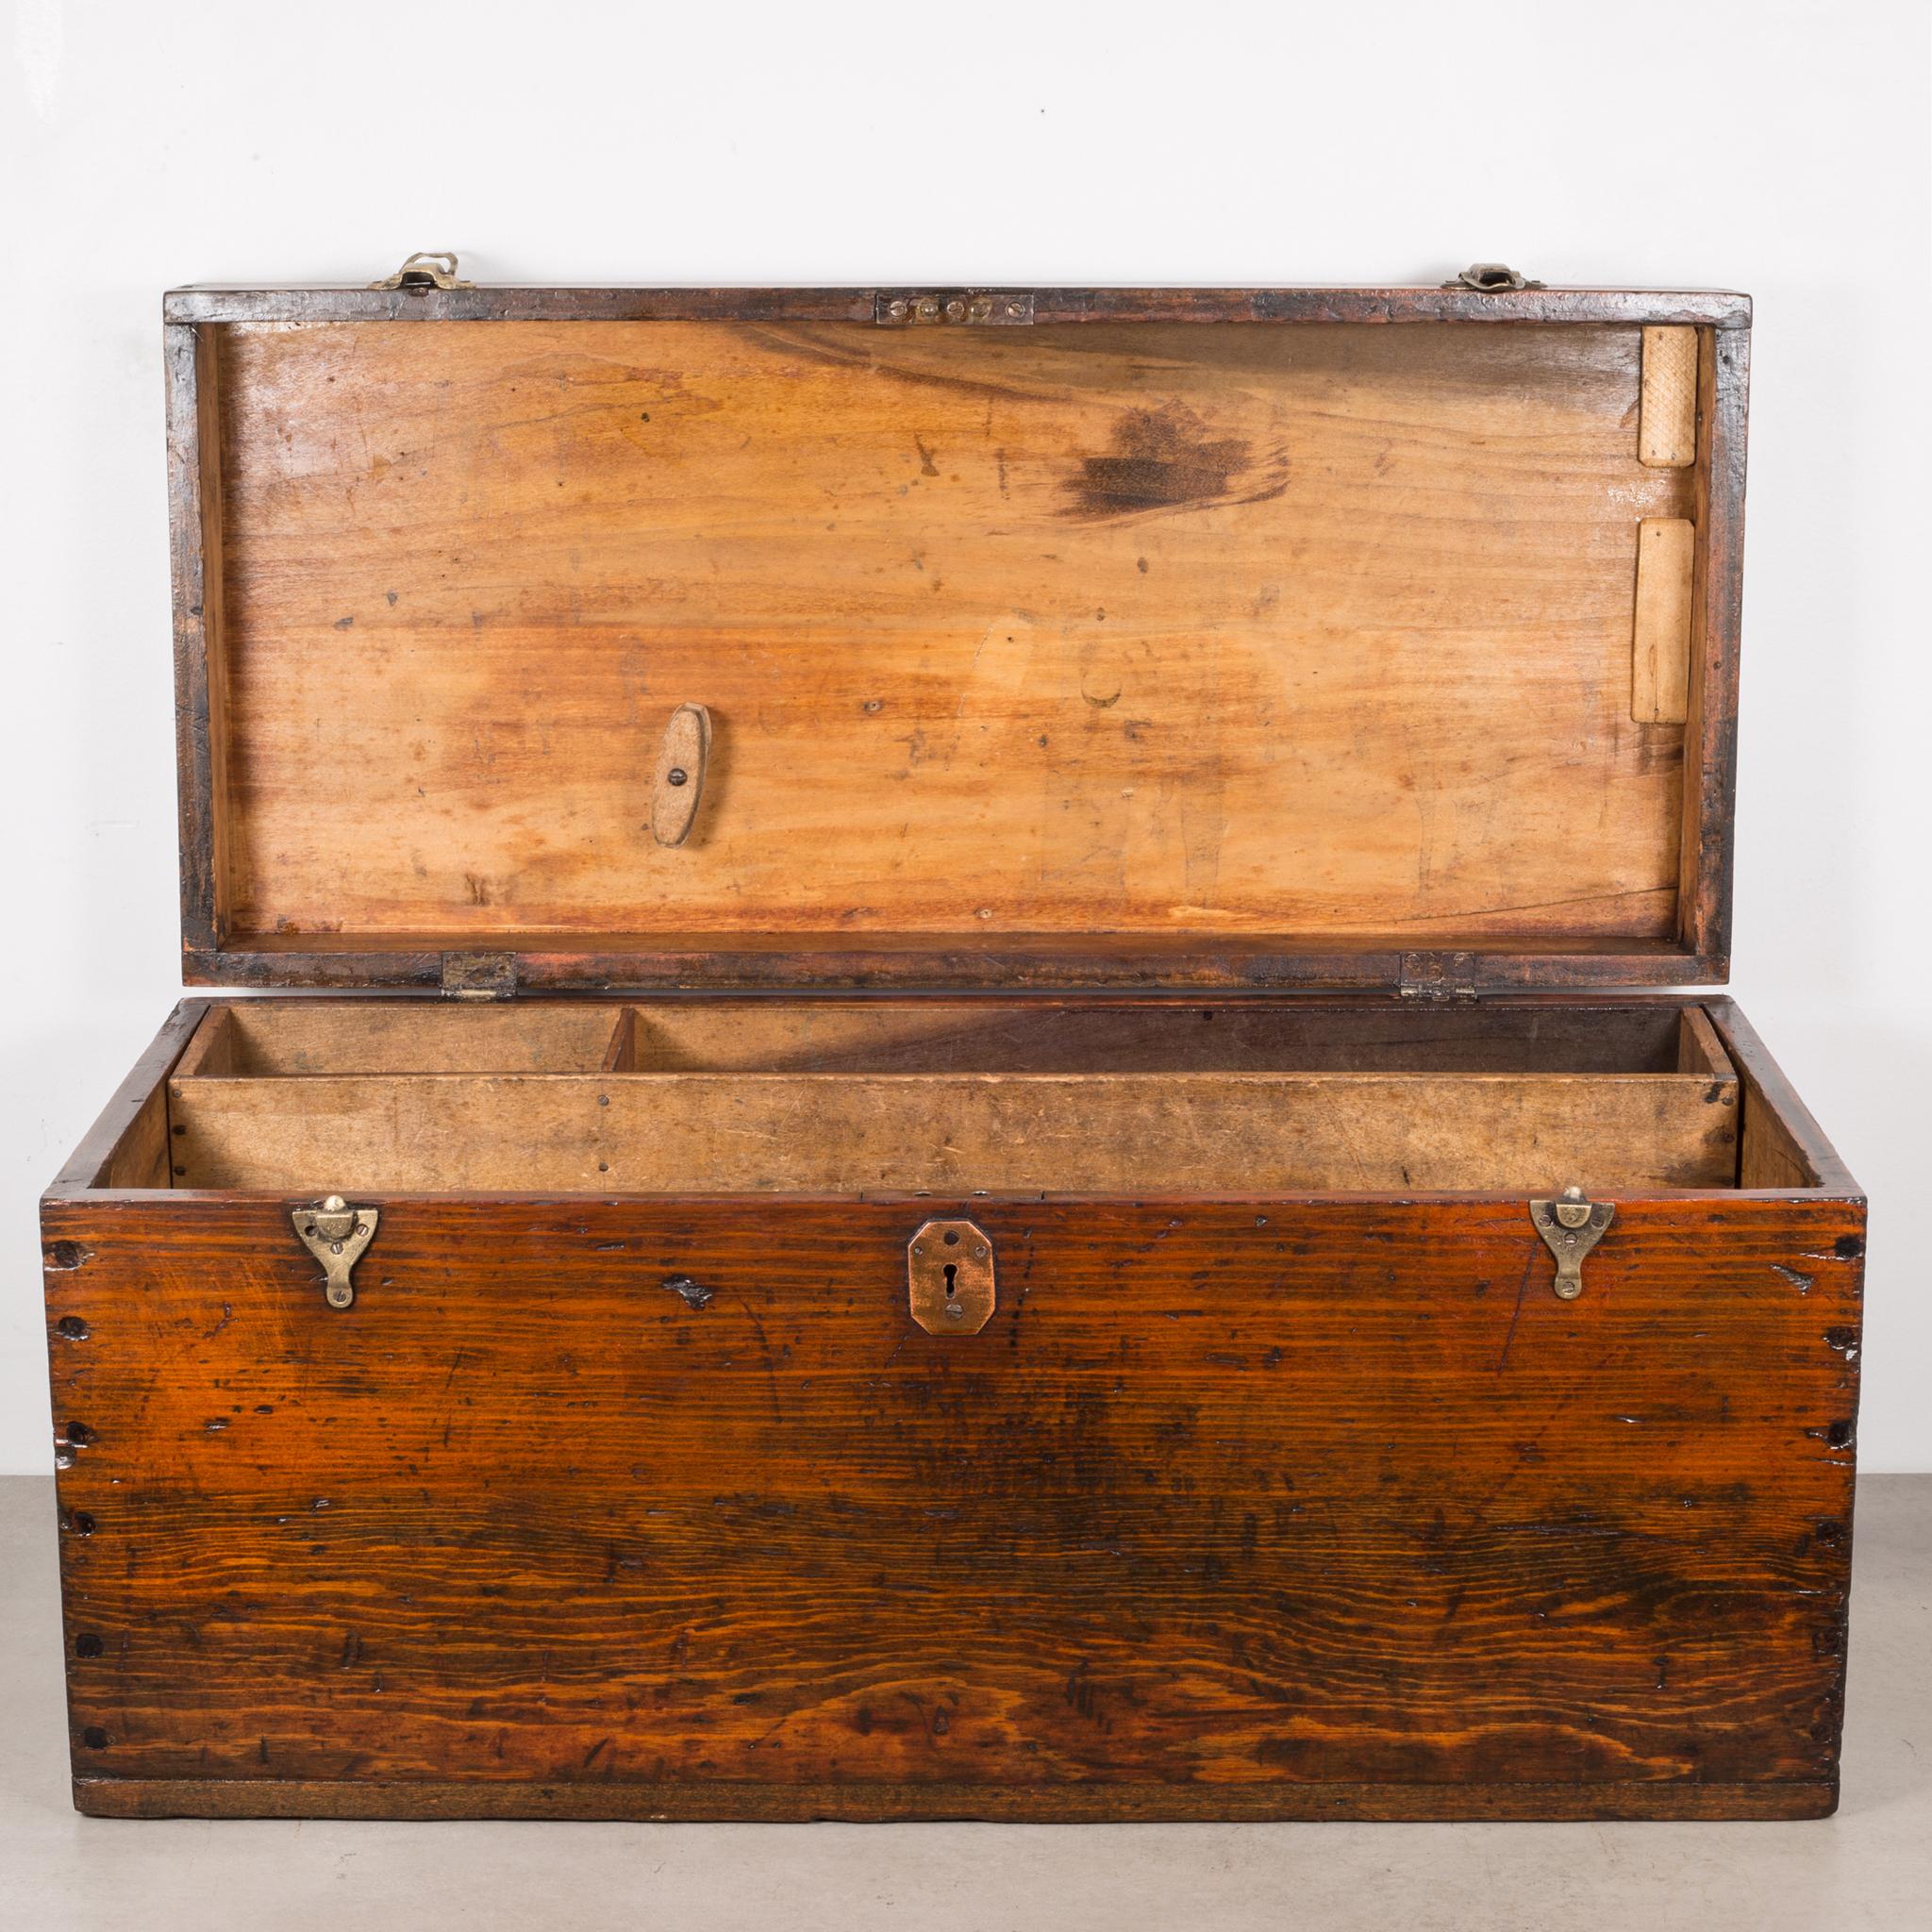 About:

A handmade Douglas fir toolbox with inner tool tray, original hinges, brass key hole and metal handles. This toolbox has been reconditioned with oil.

Creator: Unknown.
Date of manufacture: circa 1920.
Materials and techniques: Wood,